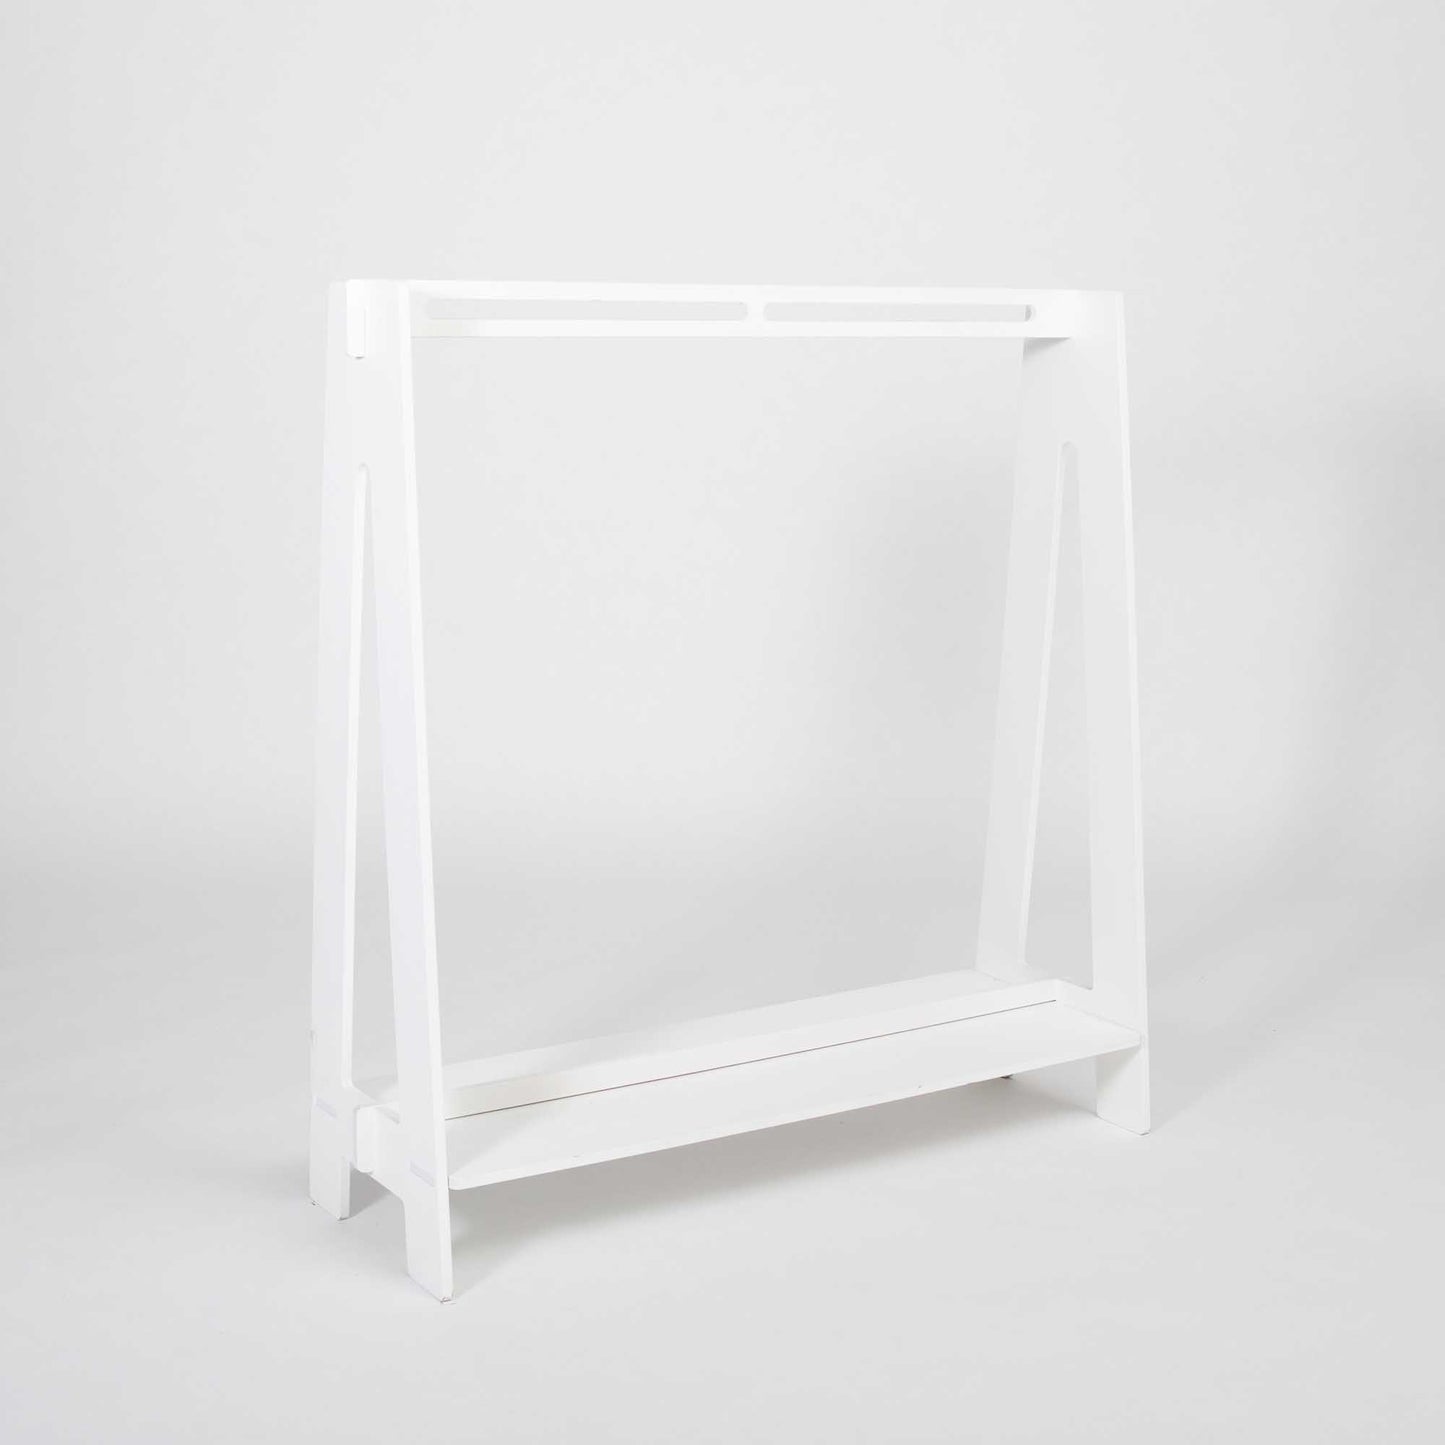 A white wooden Kids' clothing rack A-frame style against a white background.